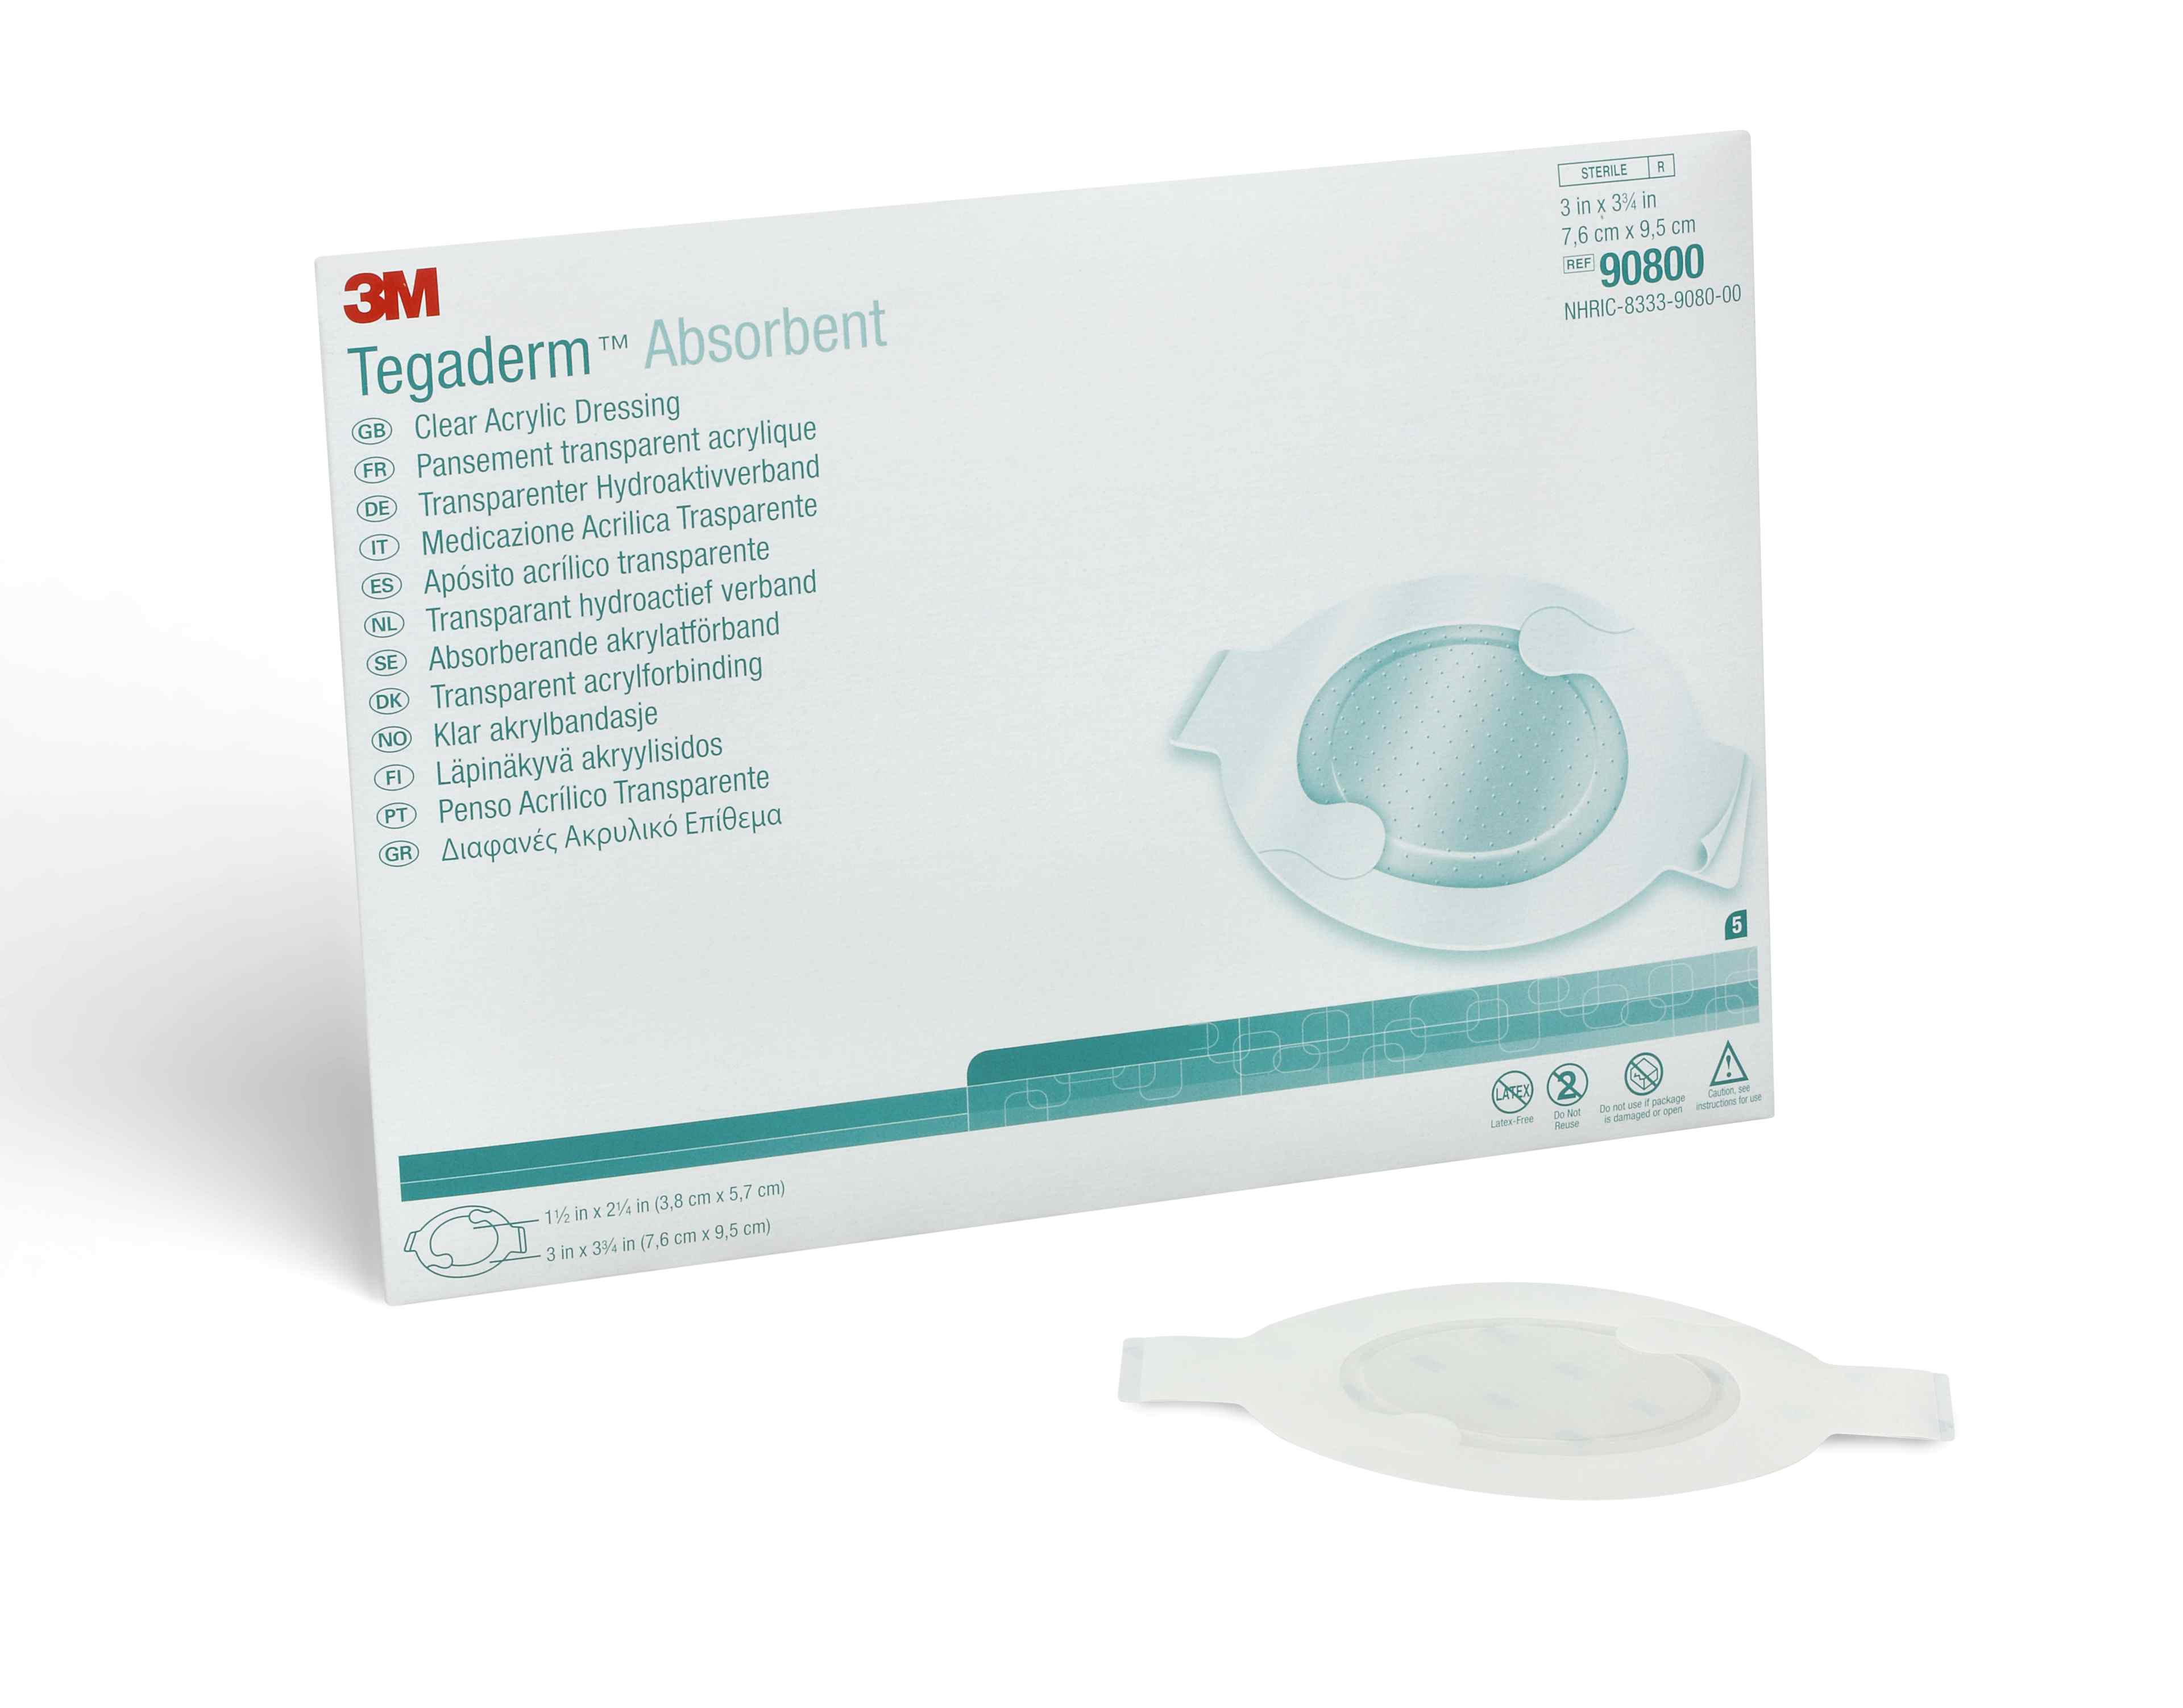 3M Tegaderm Absorbent Clear Acrylic Dressing, 3 X 3-1/4", 90800, Box of 5